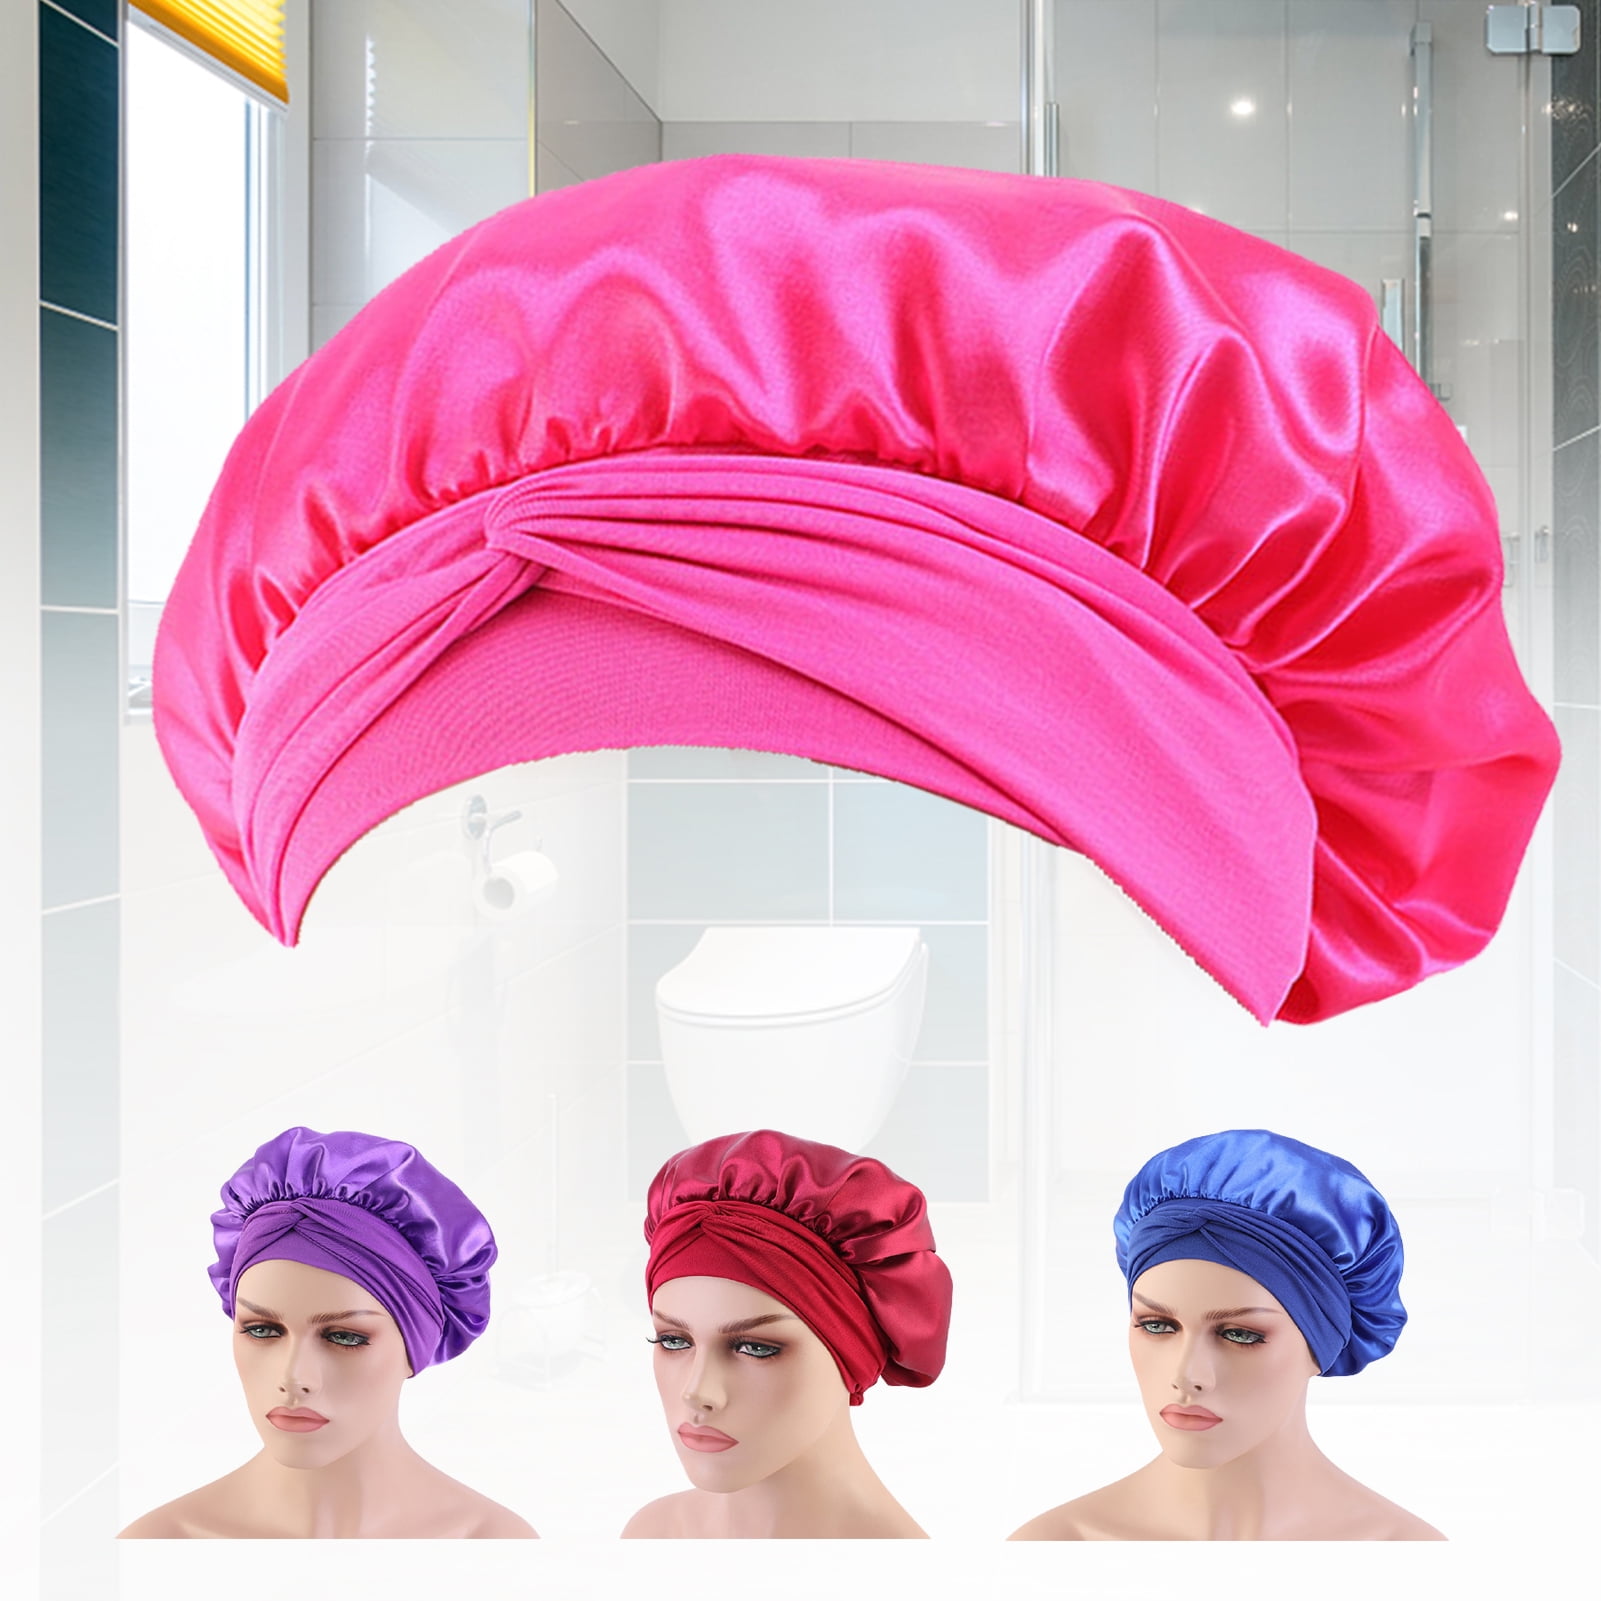  4 Pack Silky Sleep Bonnet for Curly Hair, Large Hair Bonnets  for Hair Care, Satin Sleeping Cap Night Cap for Women : Beauty & Personal  Care